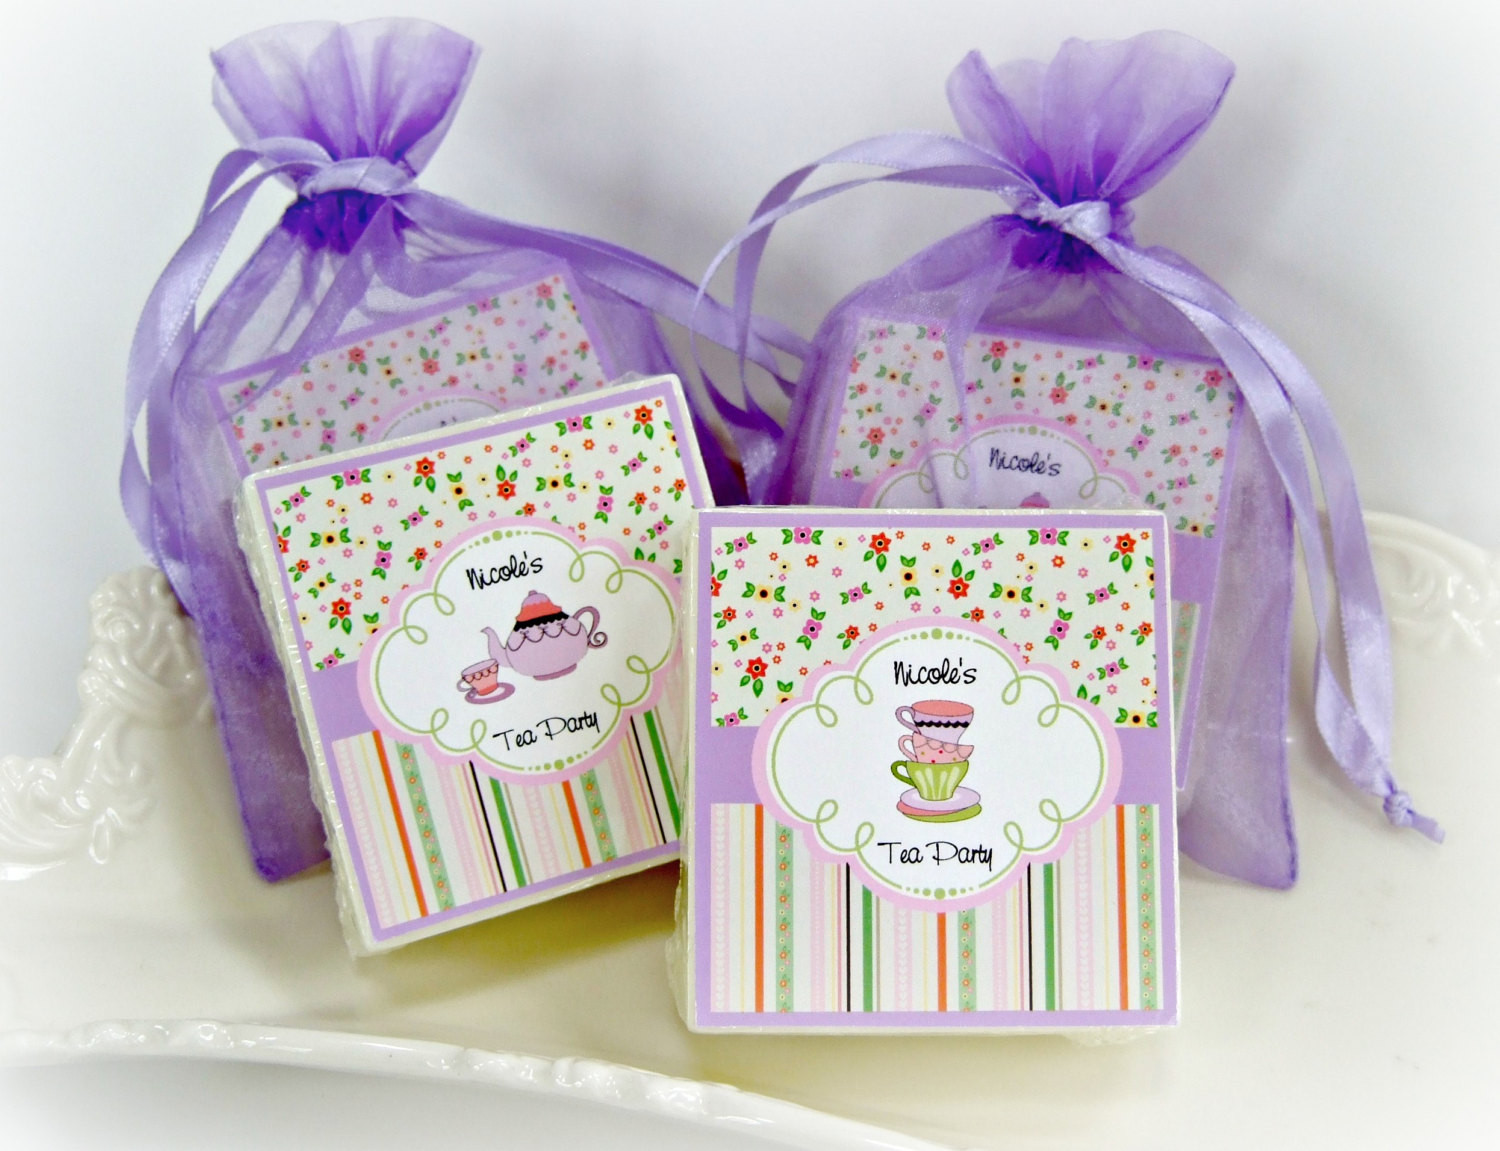 Tea Party Favor Ideas For Adults
 33 Beautiful Tea Party Decorations